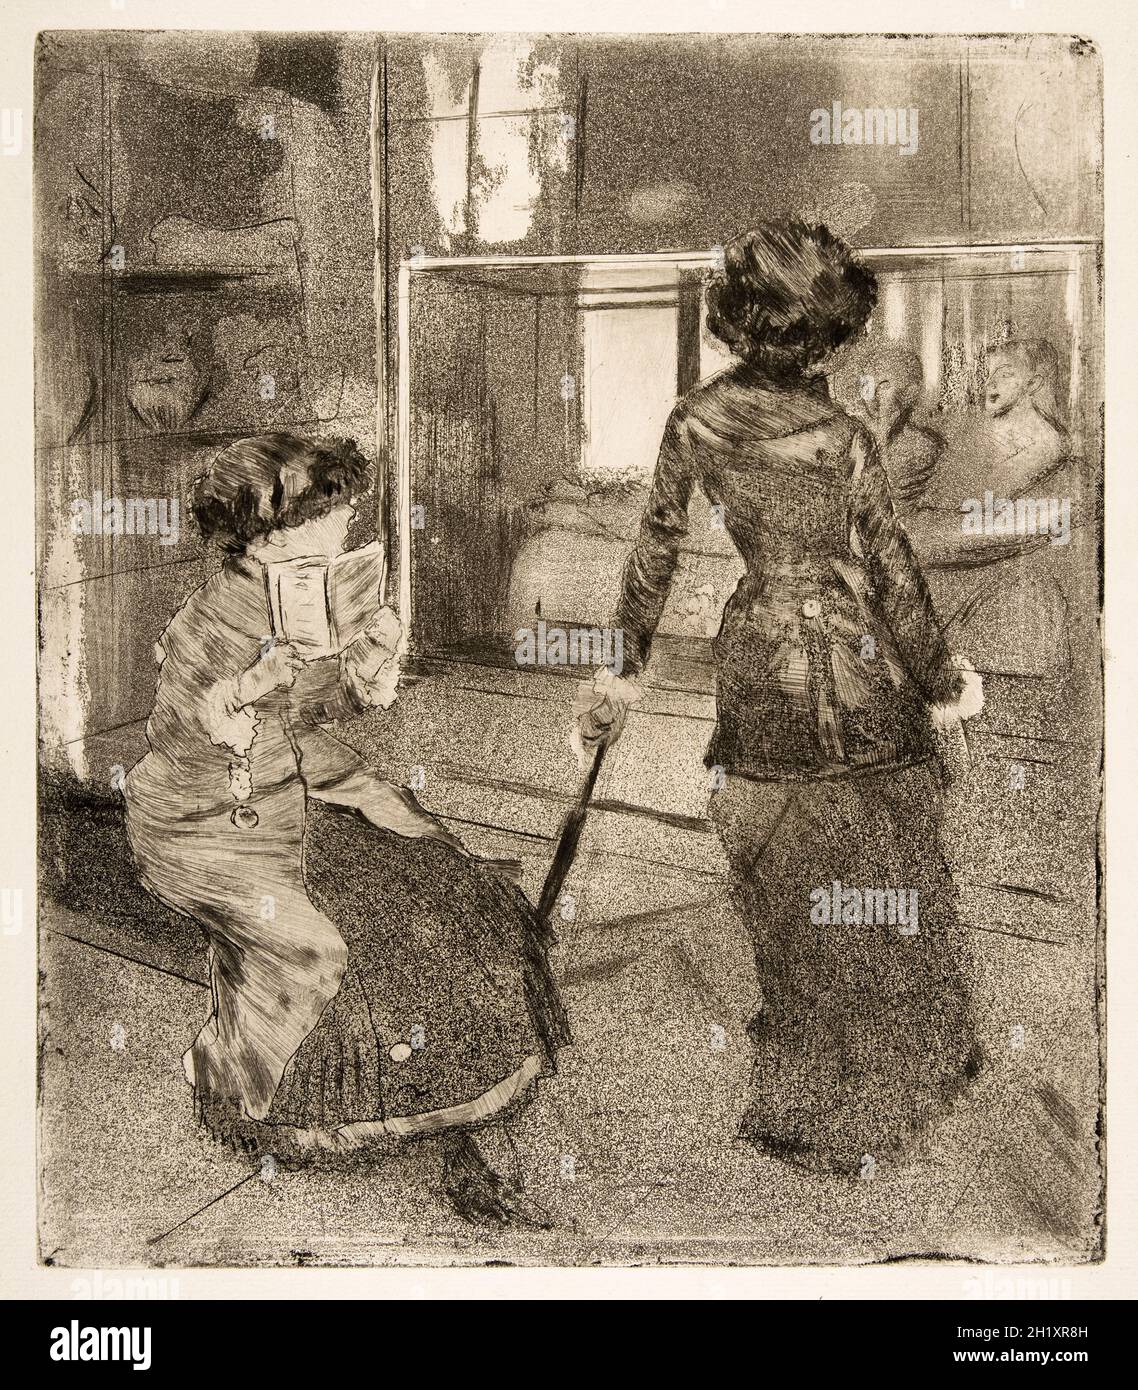 Mary Cassatt at, the Louvre: The Etruscan Gallery, drypoint and aquatint print by Edgar Degas, 1879-1880 Stock Photo